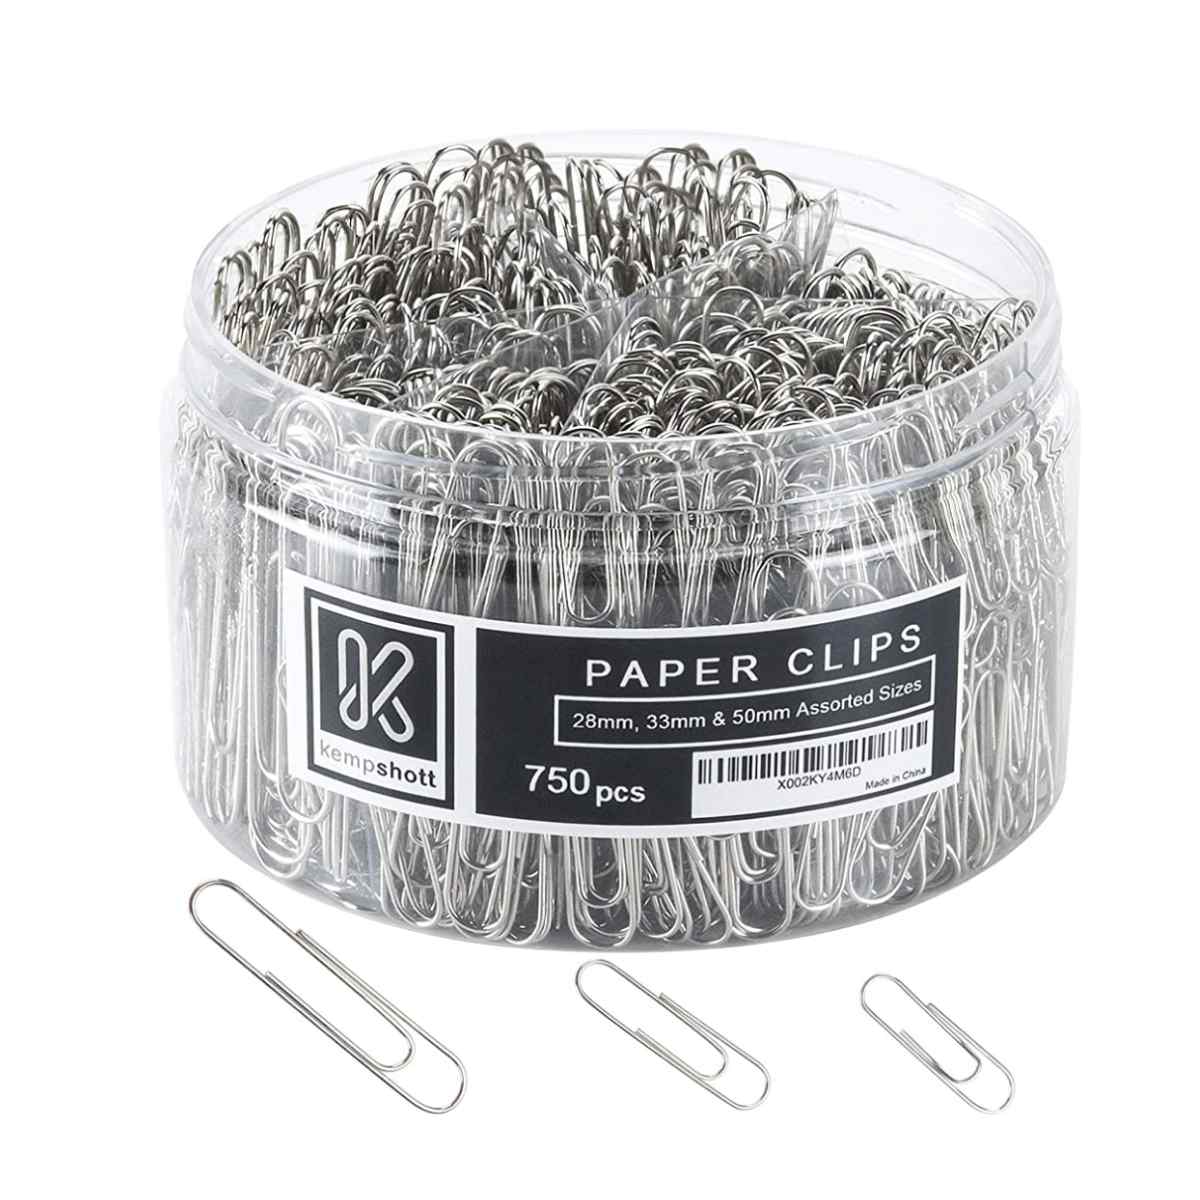 750 paper clips